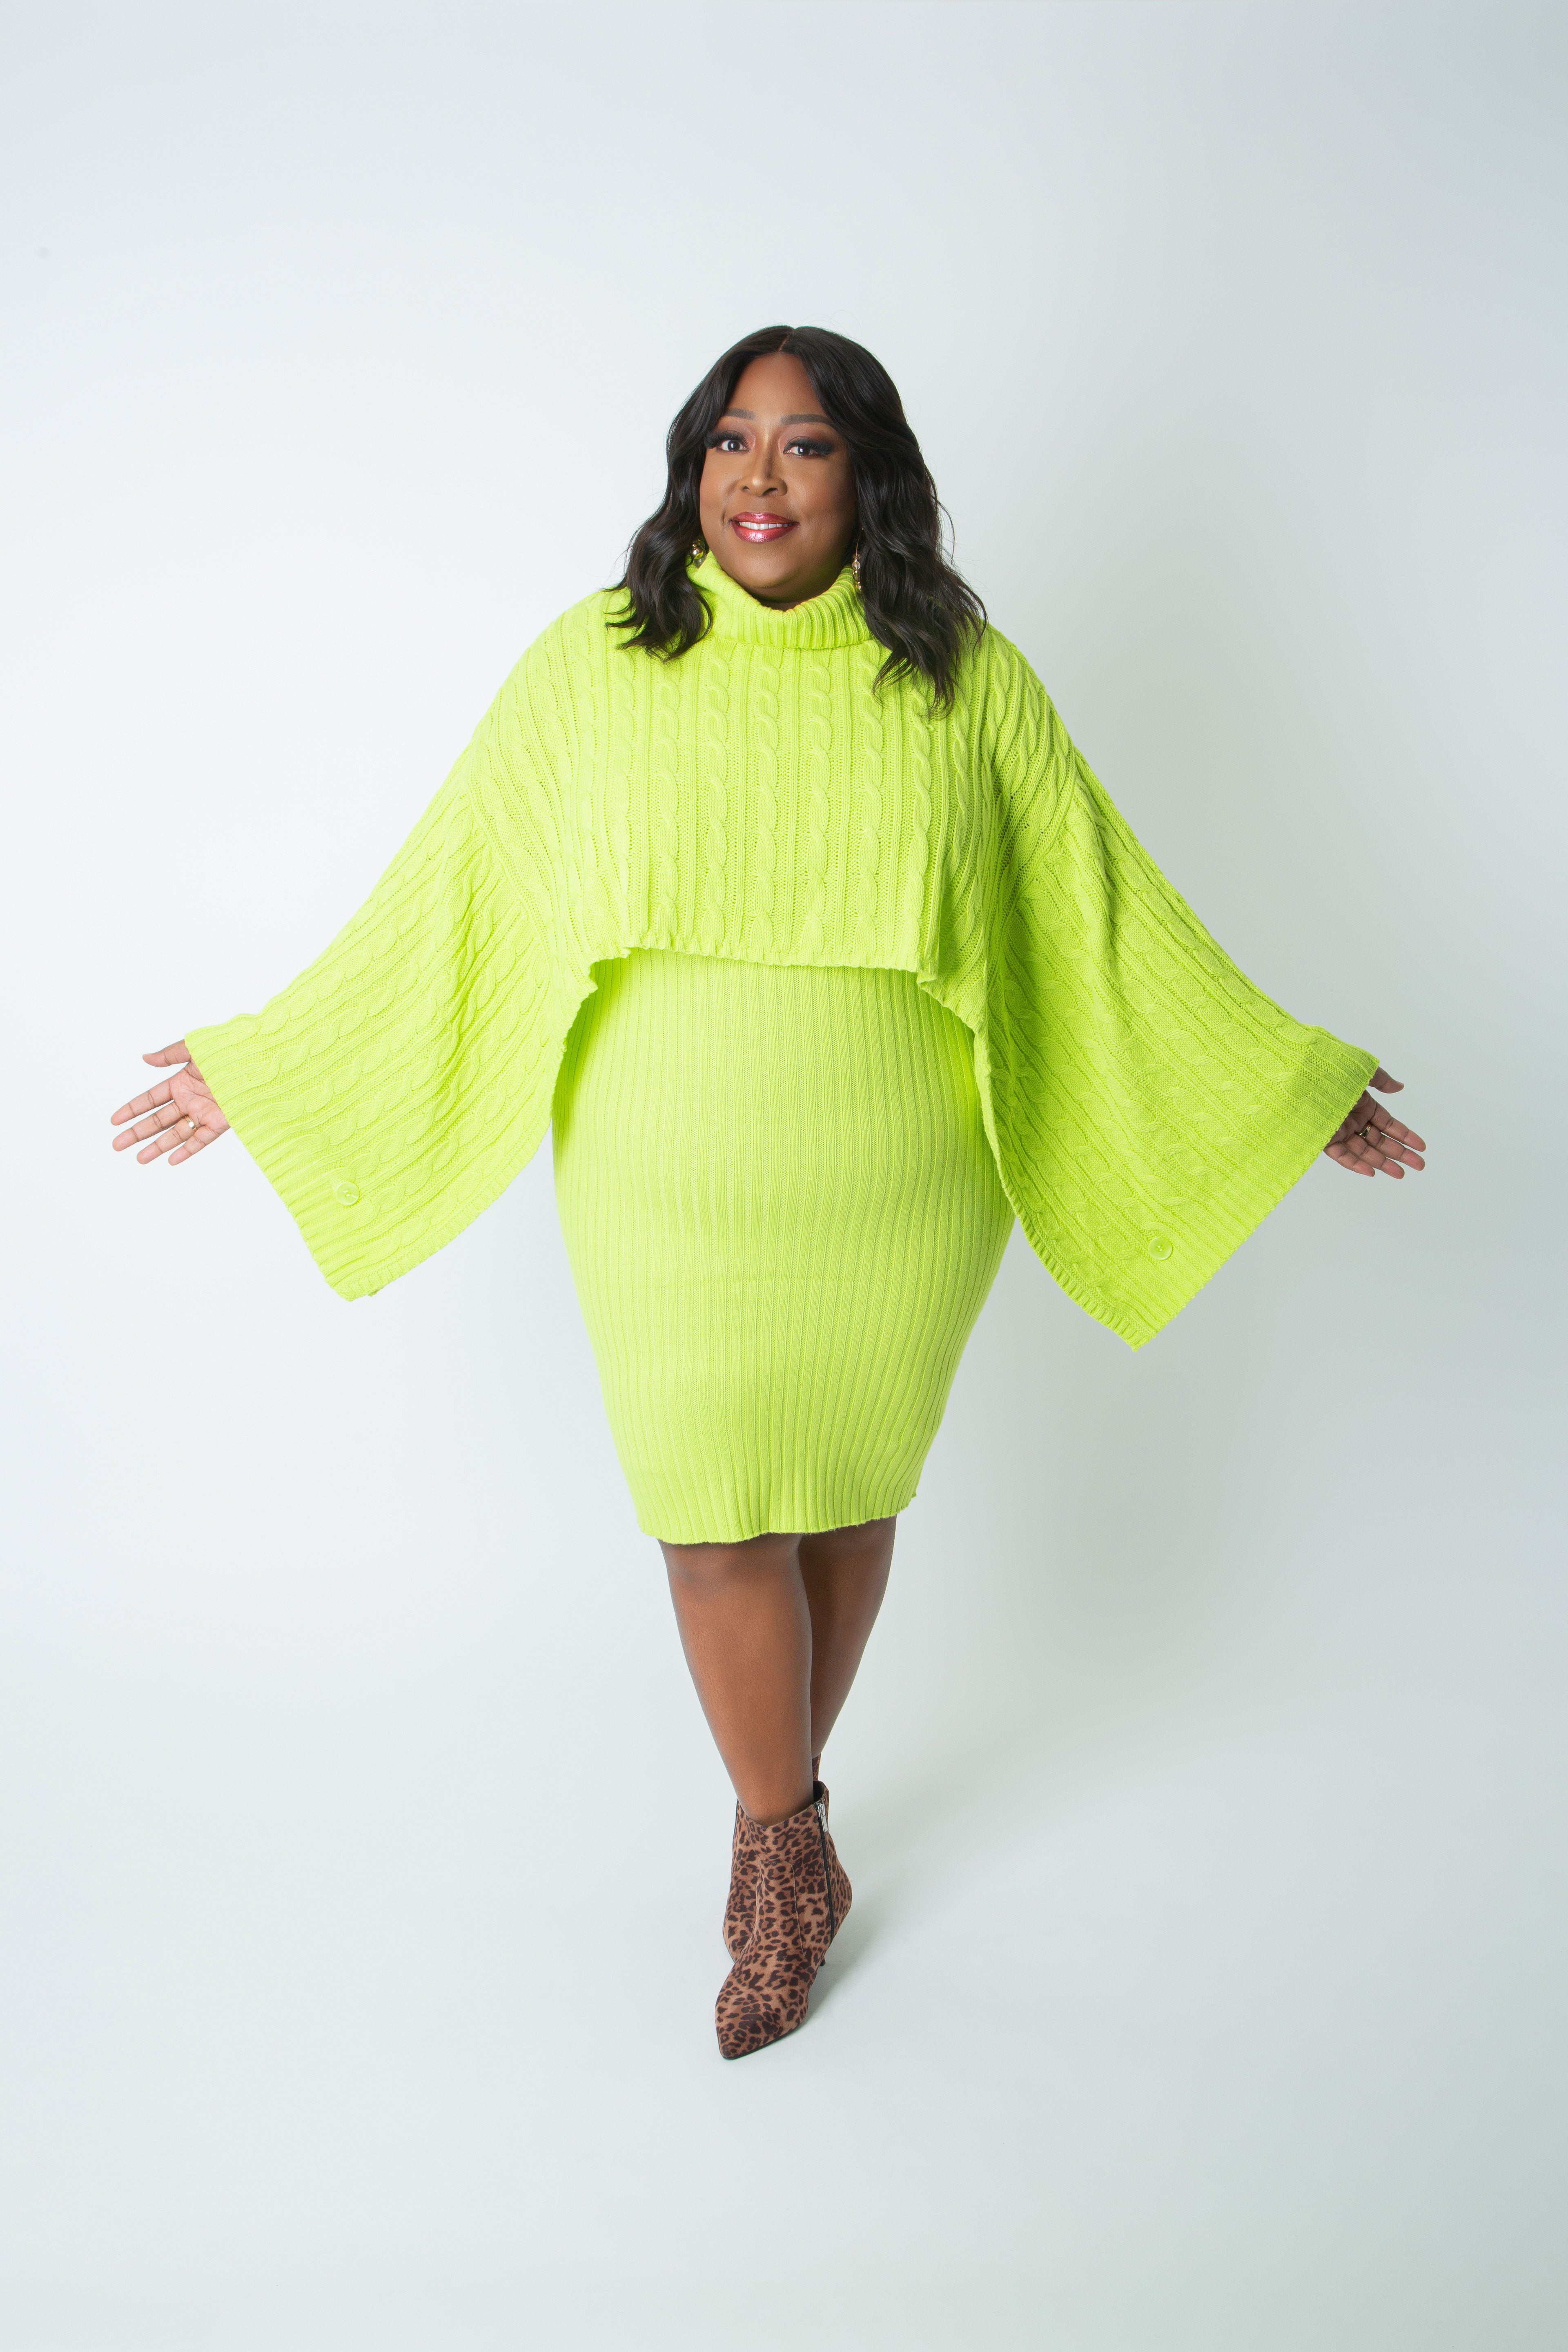 Comedian And Television Host Loni Love Launches Her First-Ever Fashion Collection